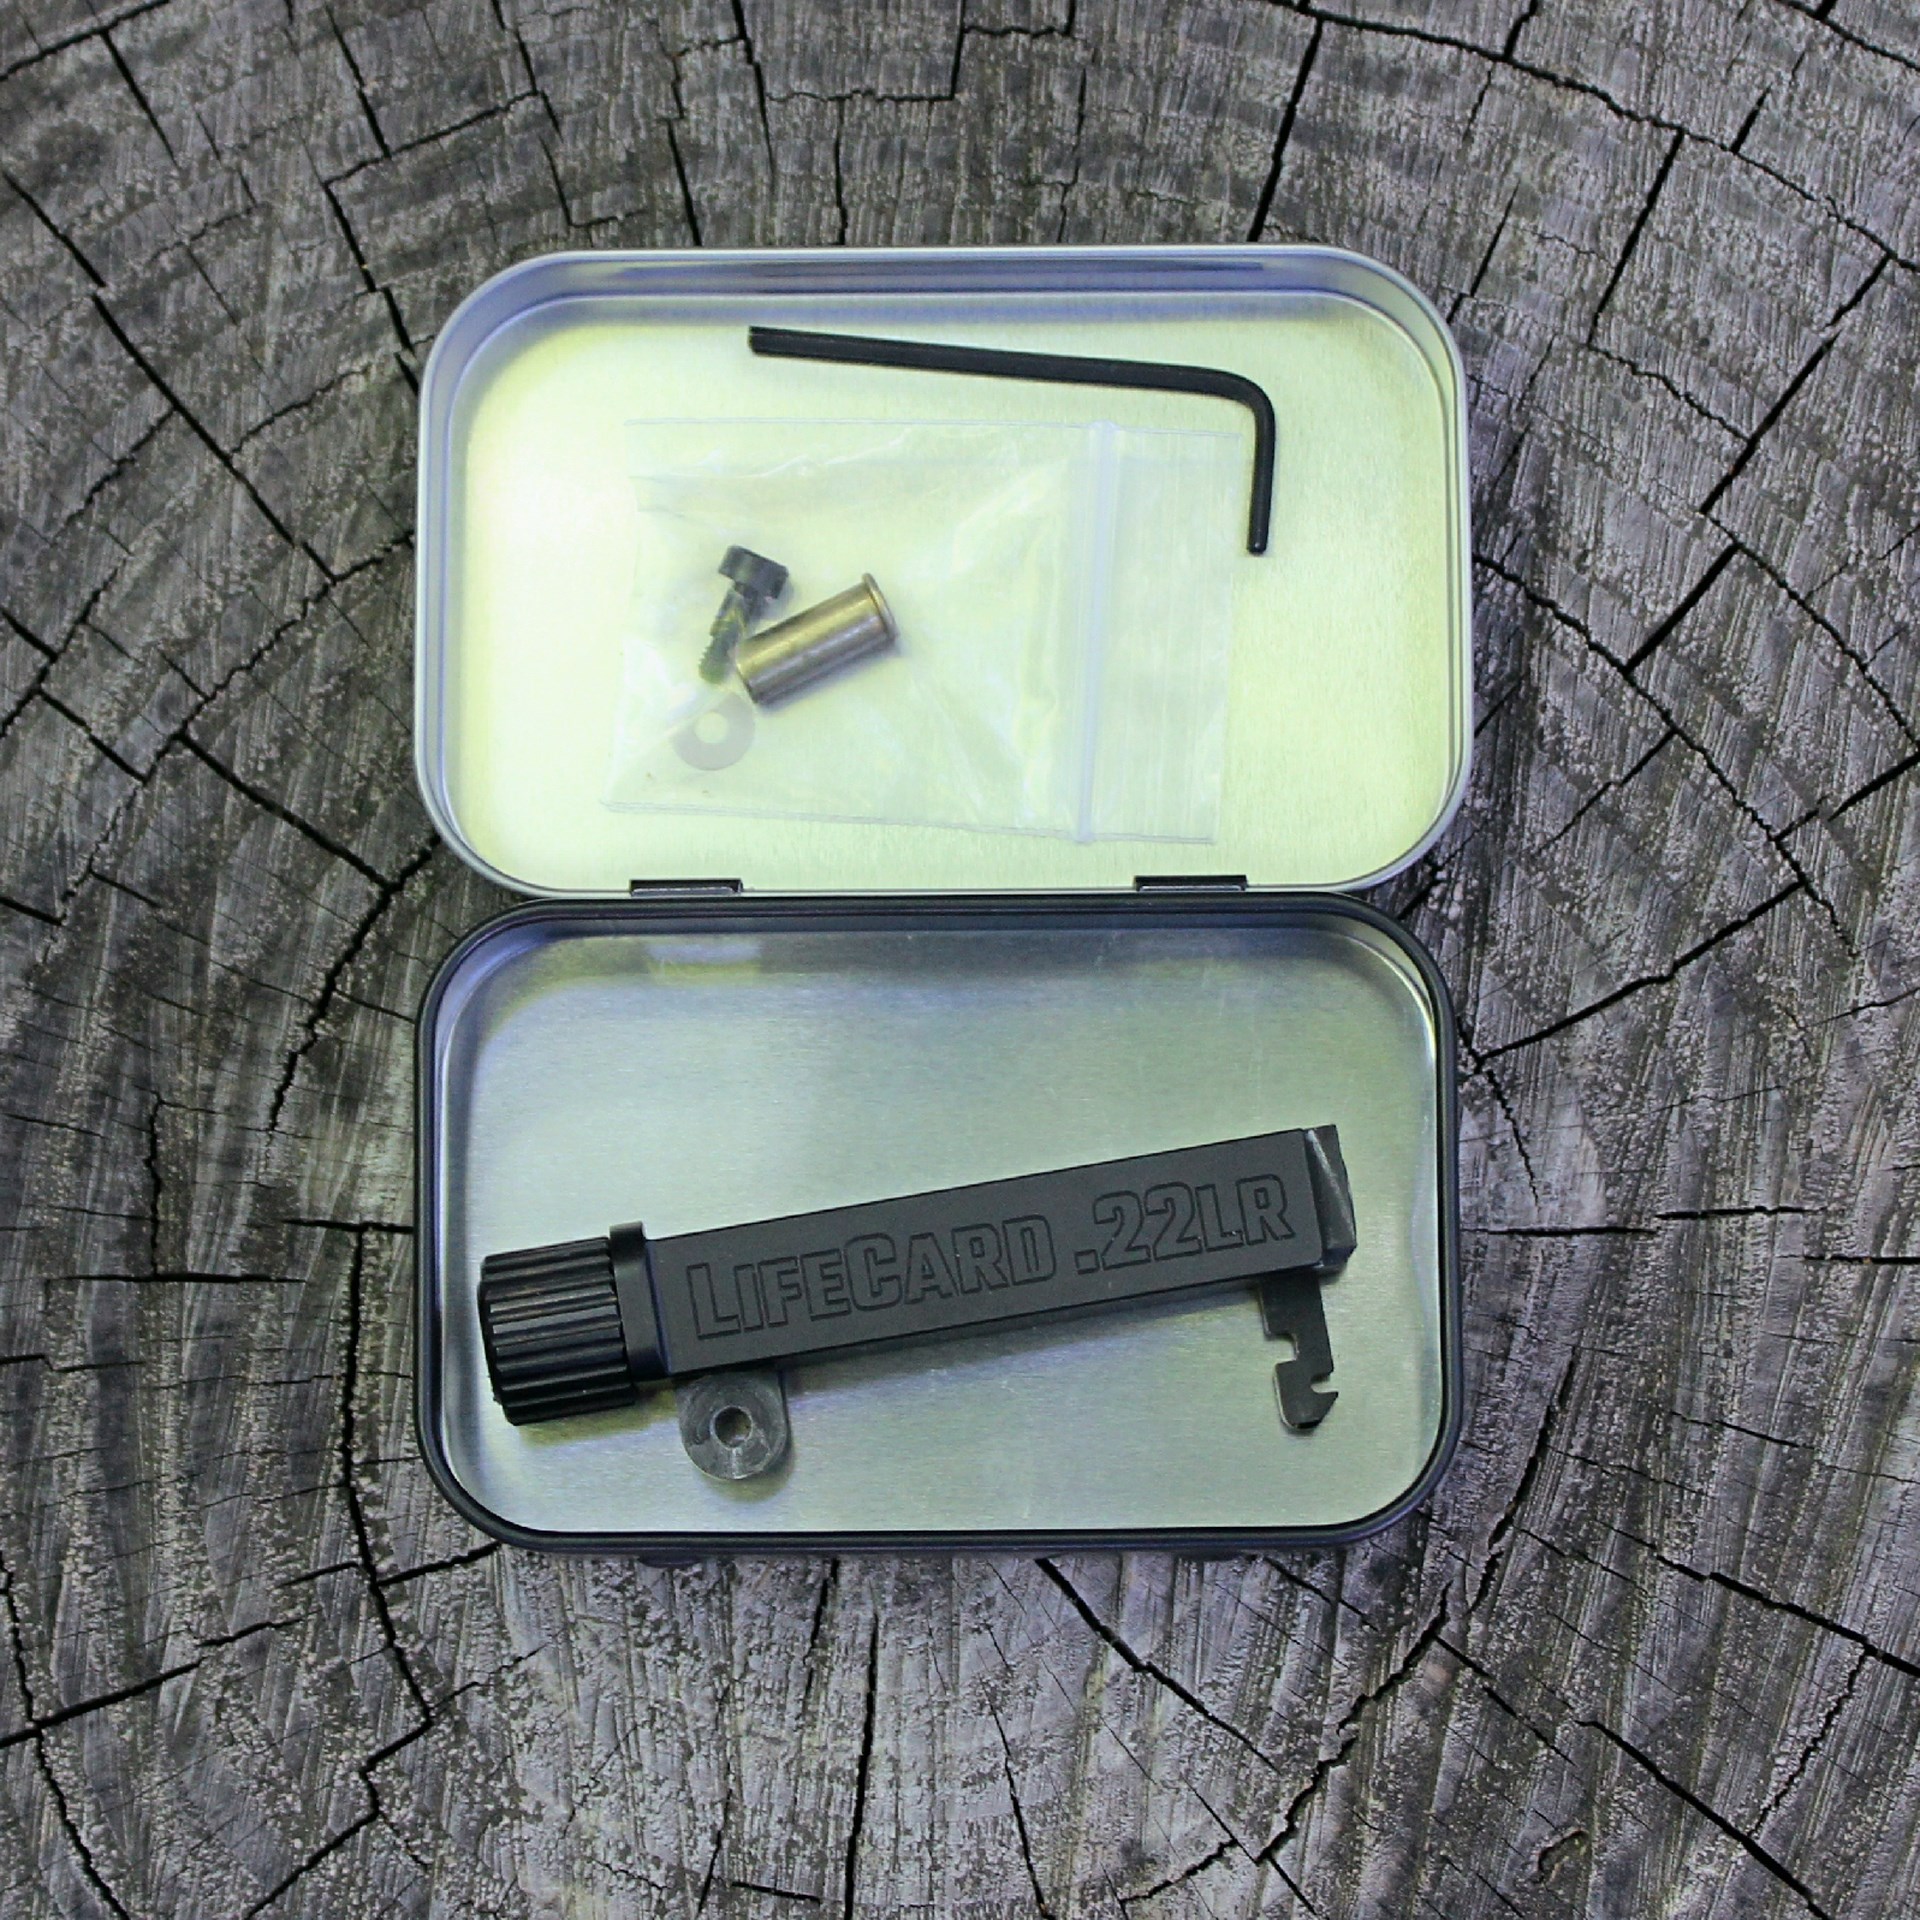 Trailblazer Firearms LifeCard barrel assembly in metal tin container shown with tools and parts on wood log